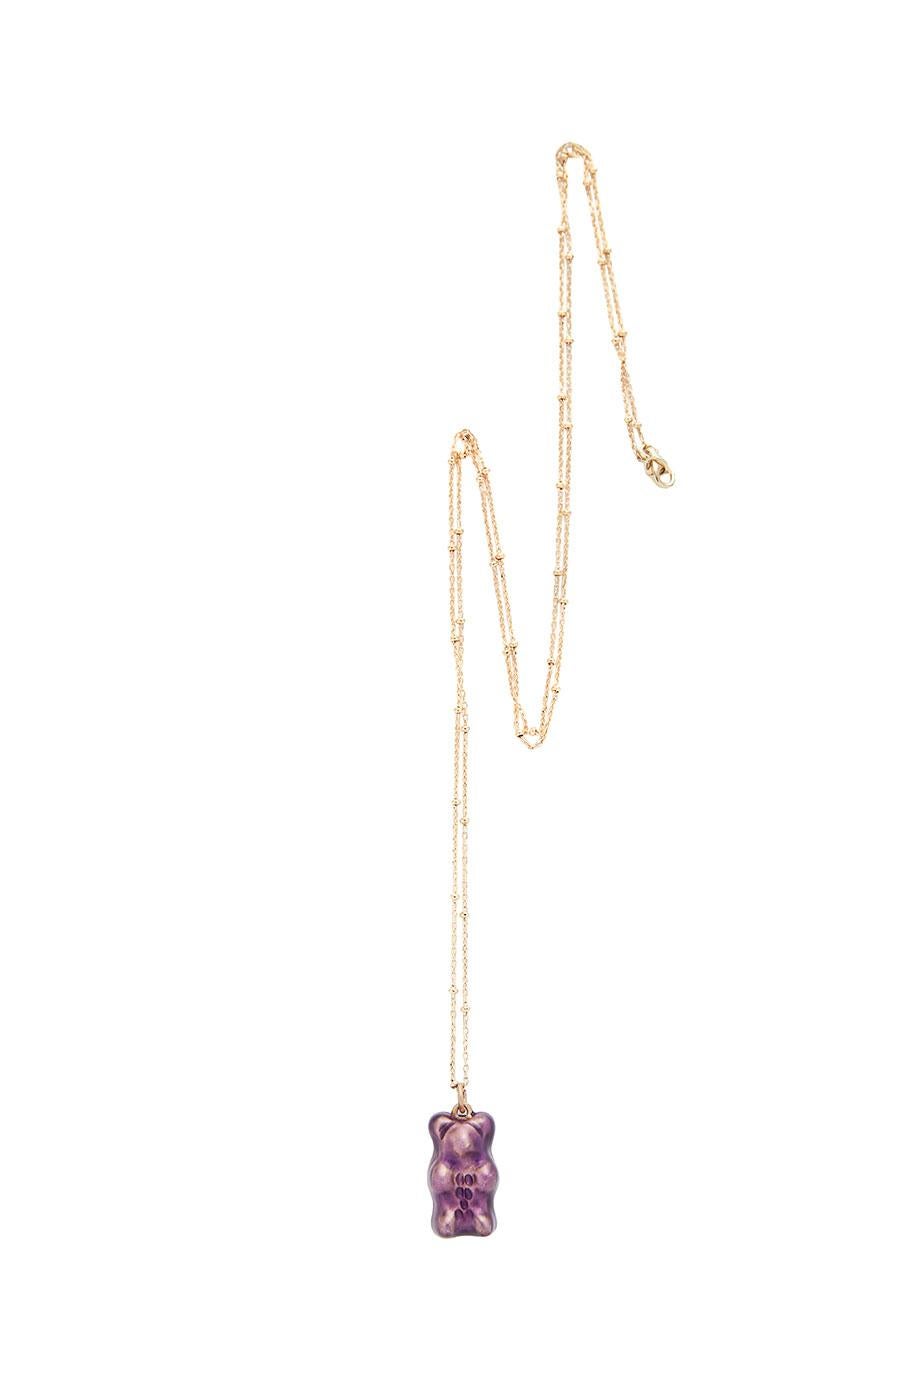 Grape  Gummy bear 


18K gold plated silver gummy bear pendant on silver gold plated chain with transparent purple enamel coverage. 

The Gummy Project by Maggoosh is a capsule collection inspired by the designer's life in New York City and her